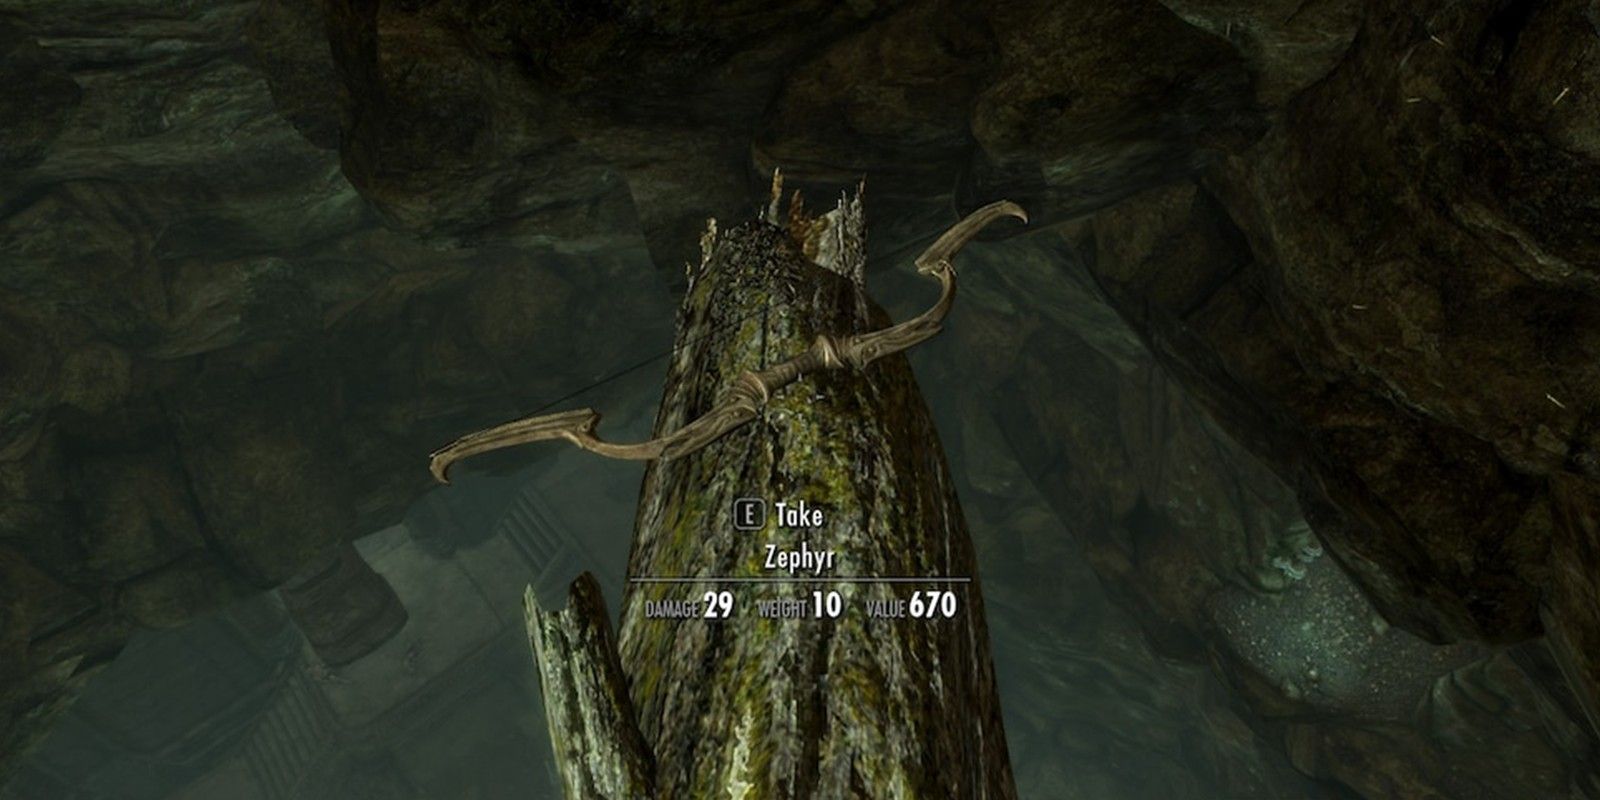 The bow Zephyr as found in Skyrim